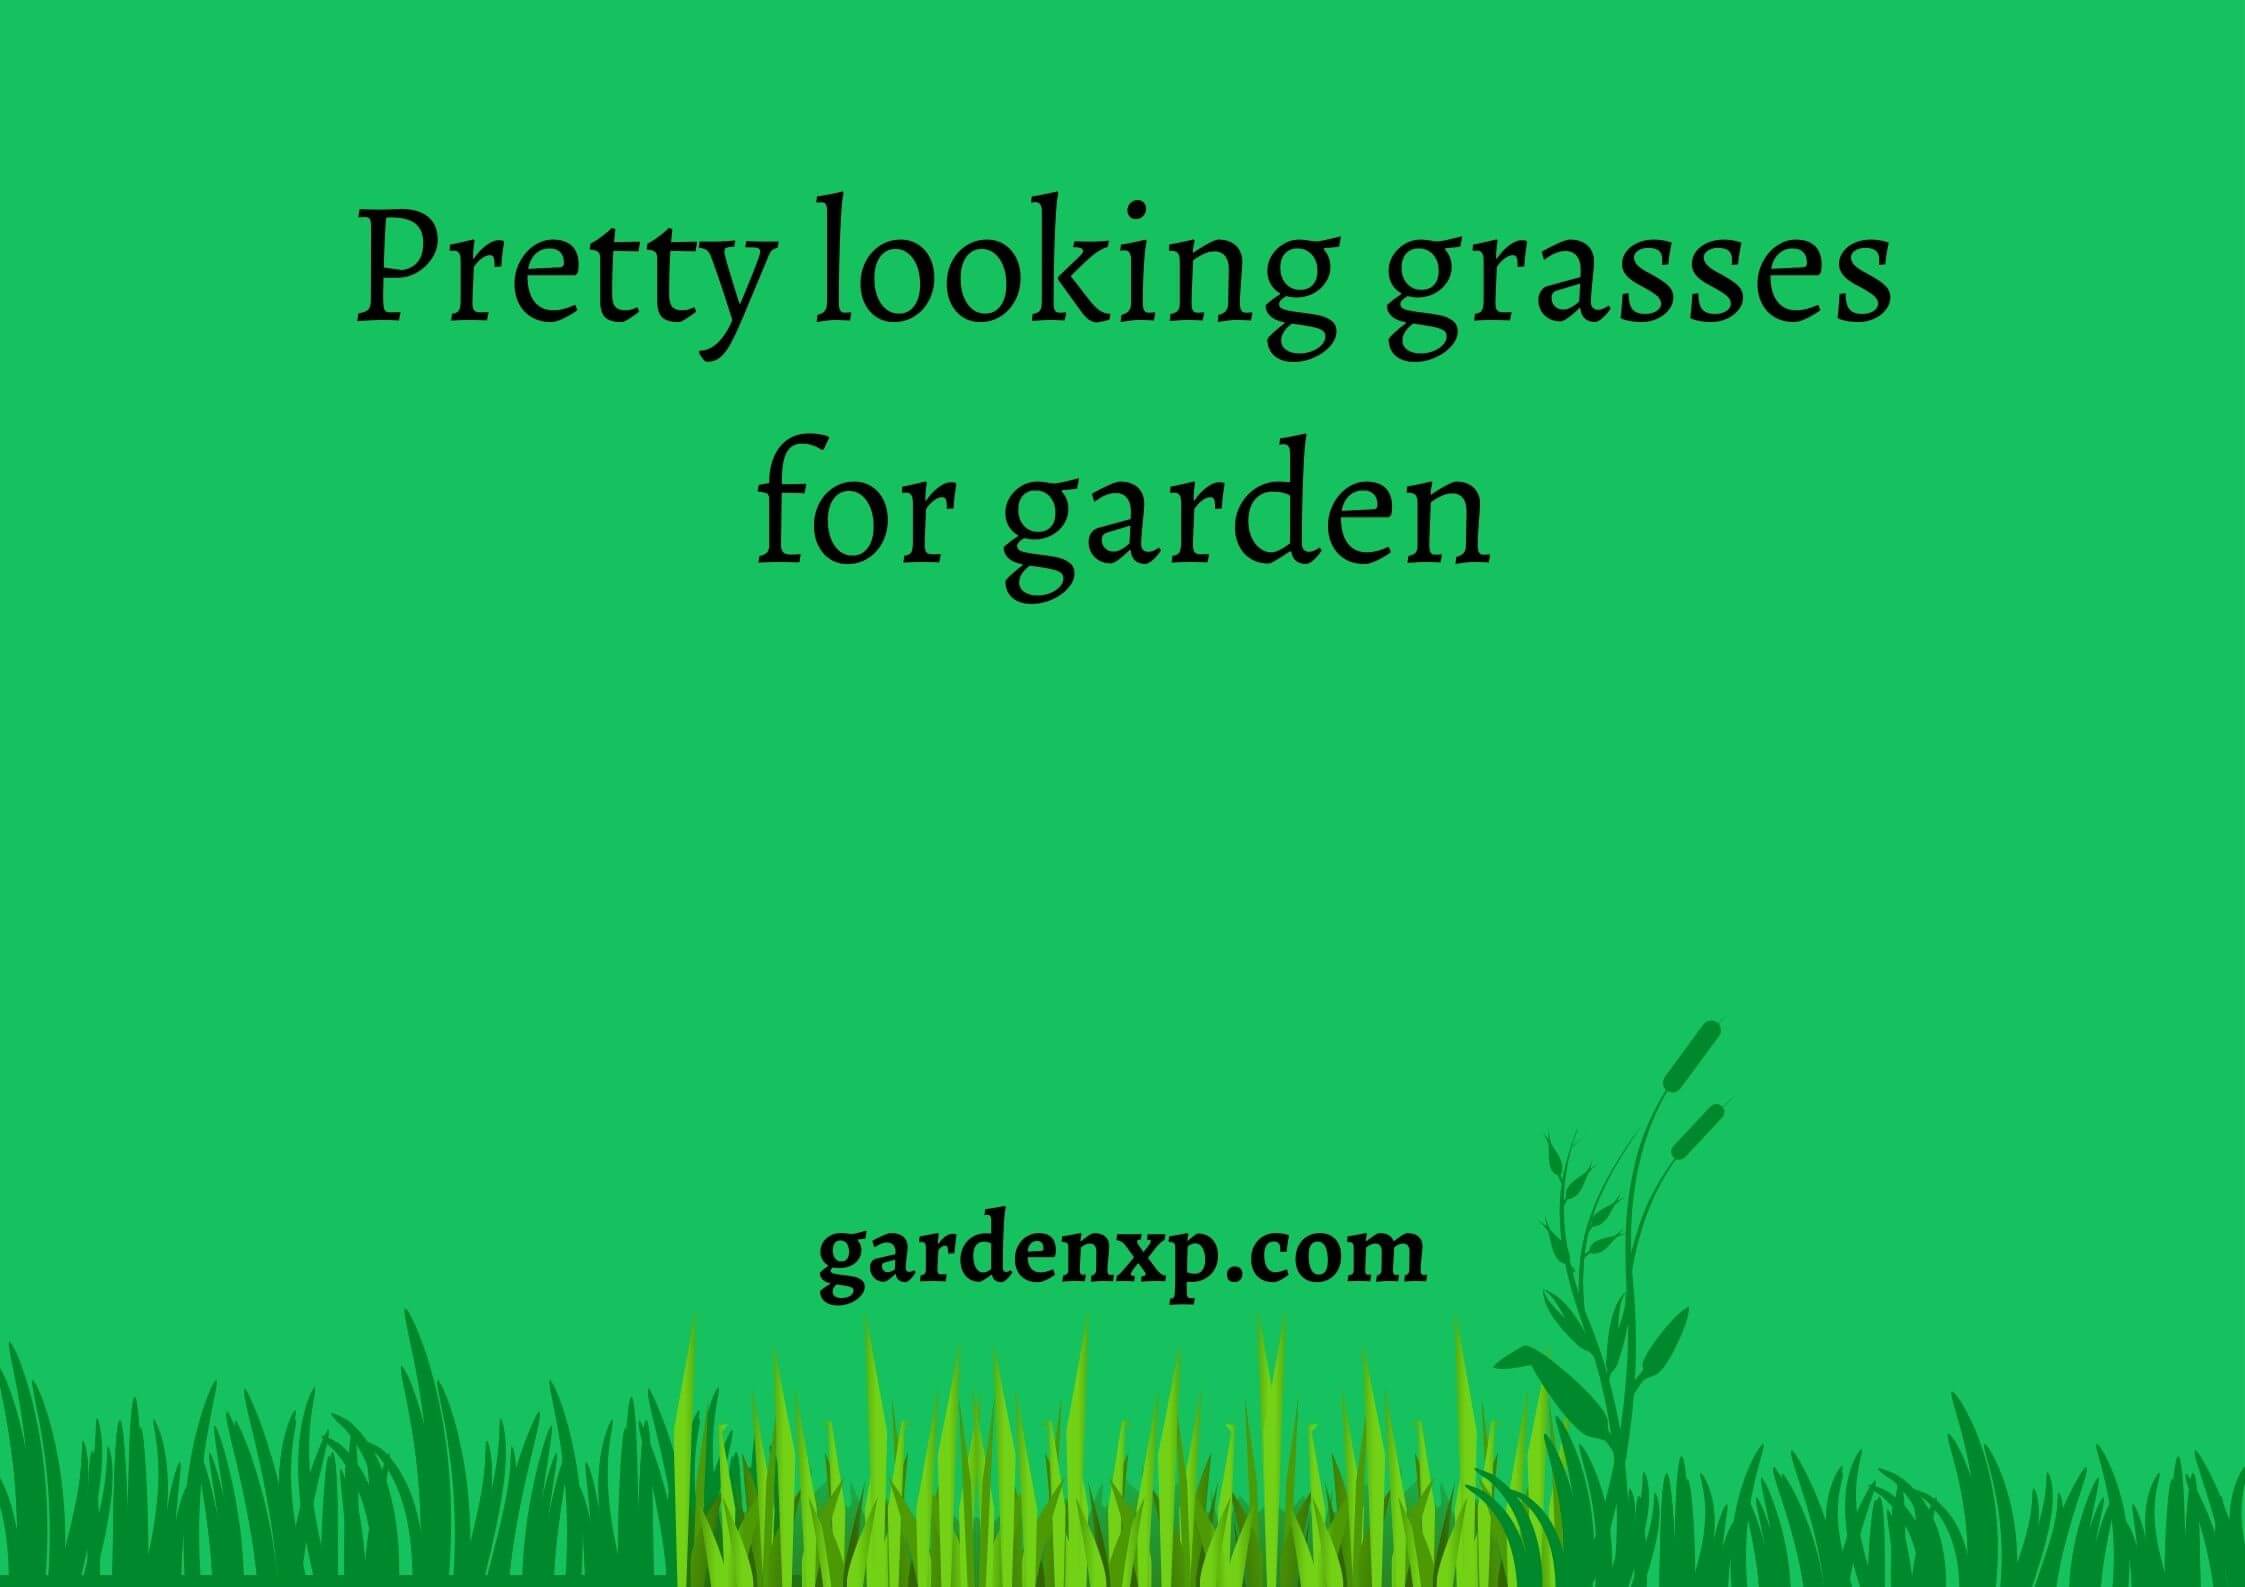 Pretty looking grasses for garden